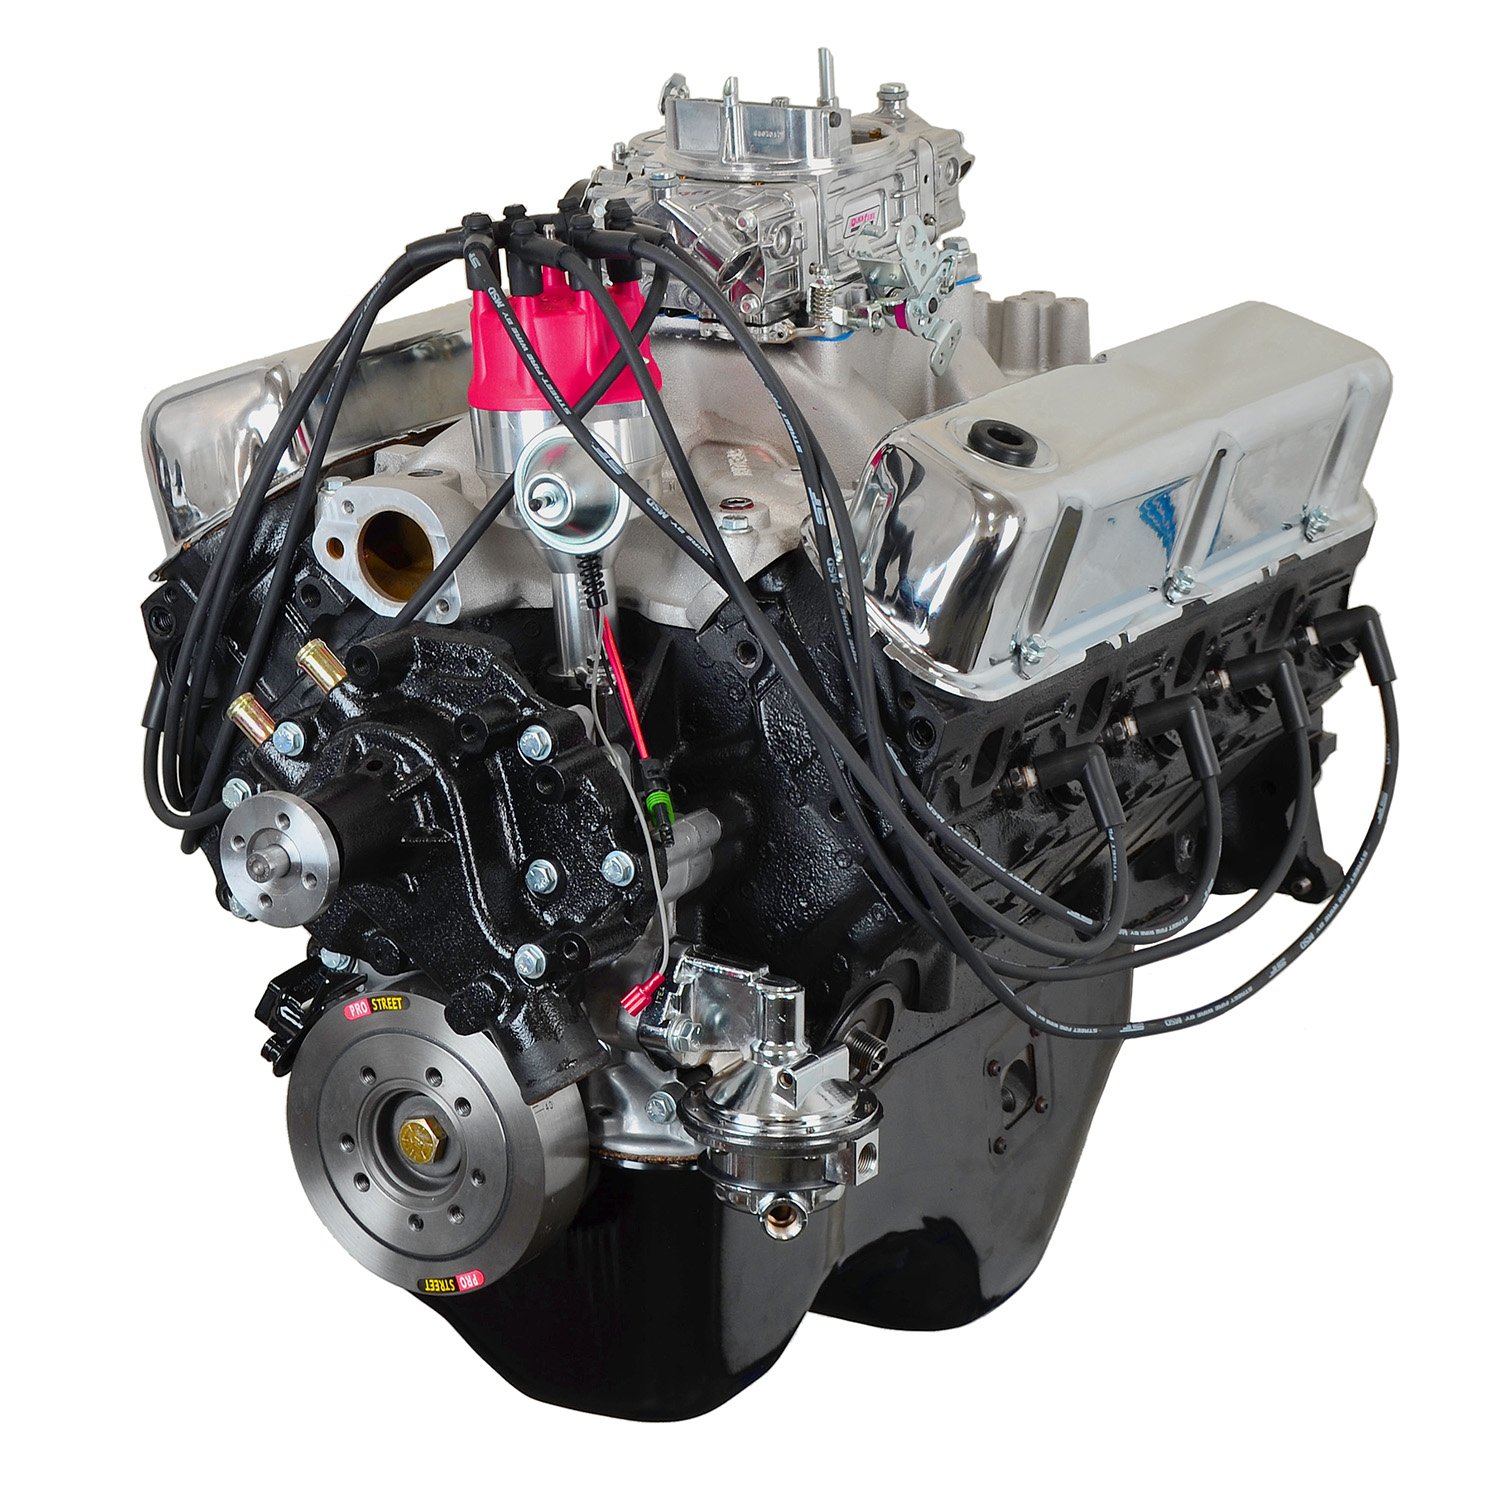 HP09C High Performance Crate Engine Small Block Ford 351W / 300HP / 377TQ